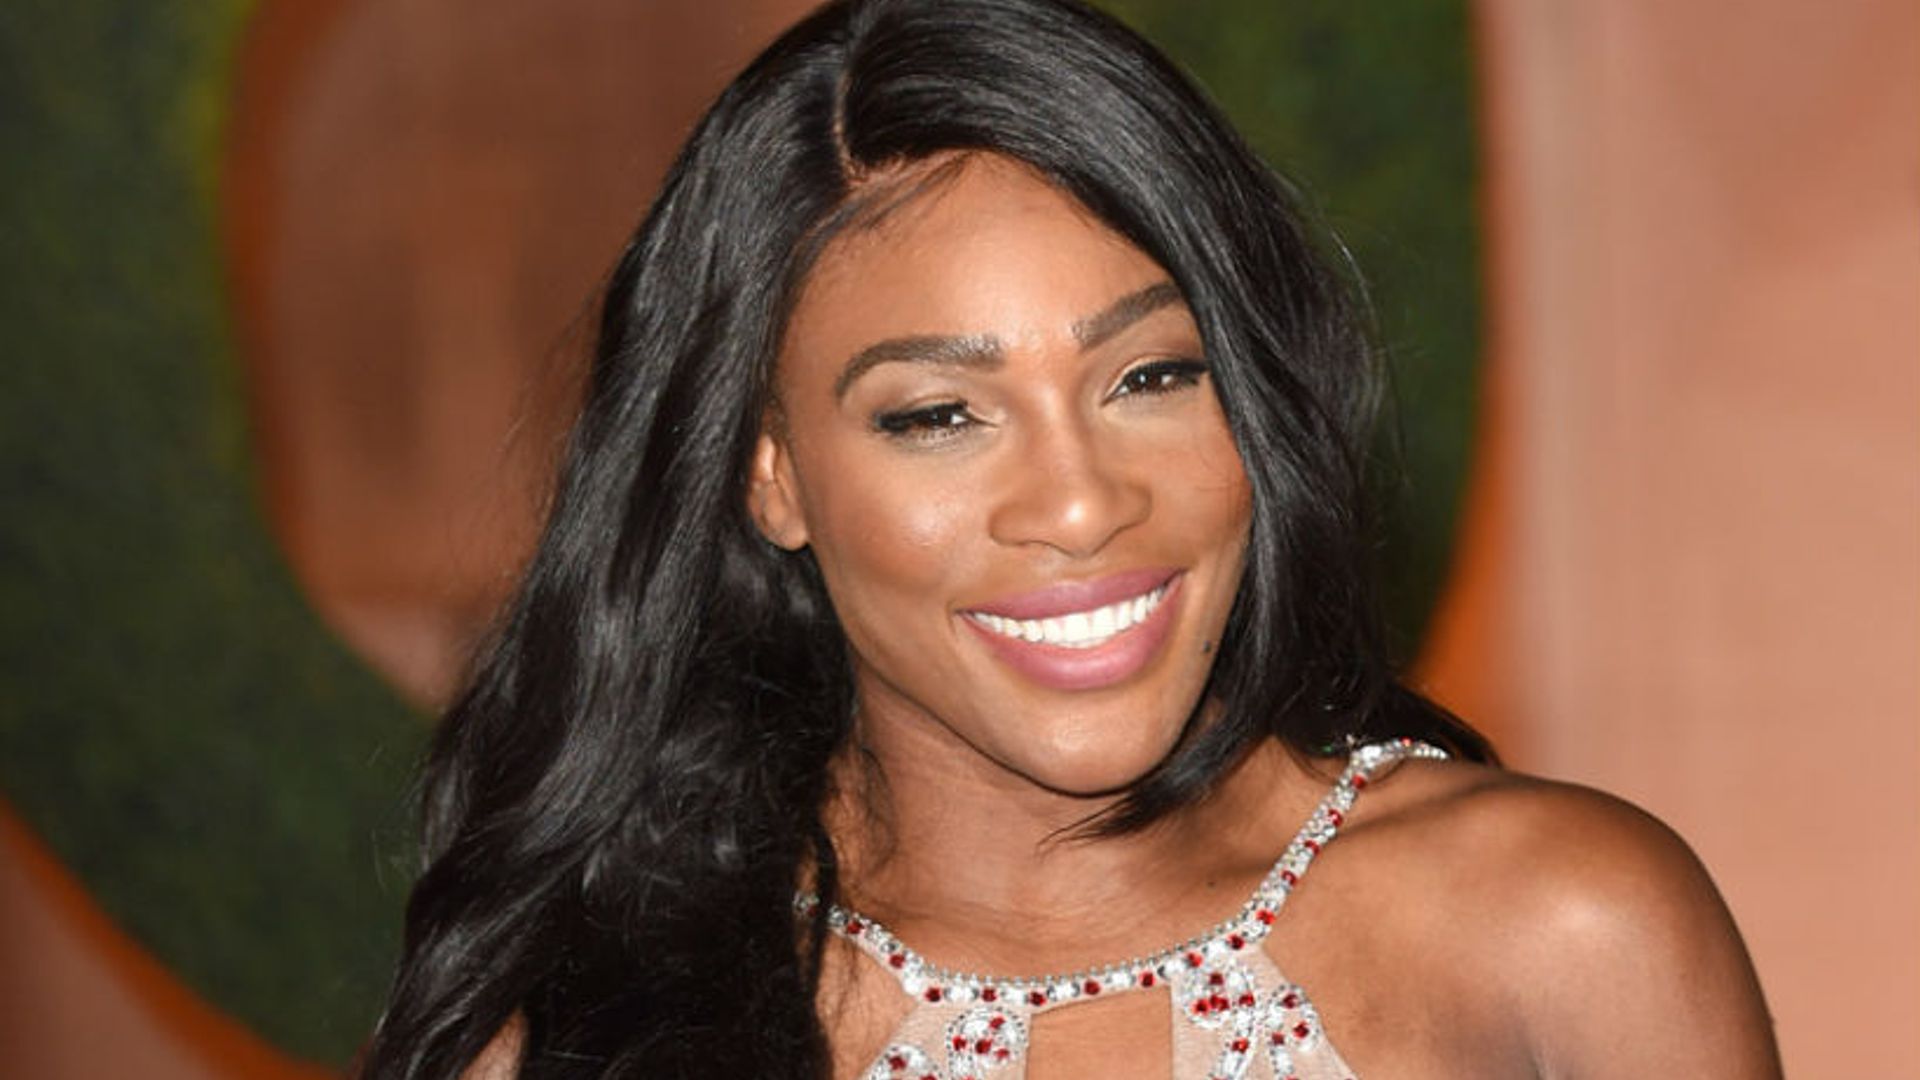 Serena Williams bares bump for Vanity Fair and admits she is still in shock with her pregnancy